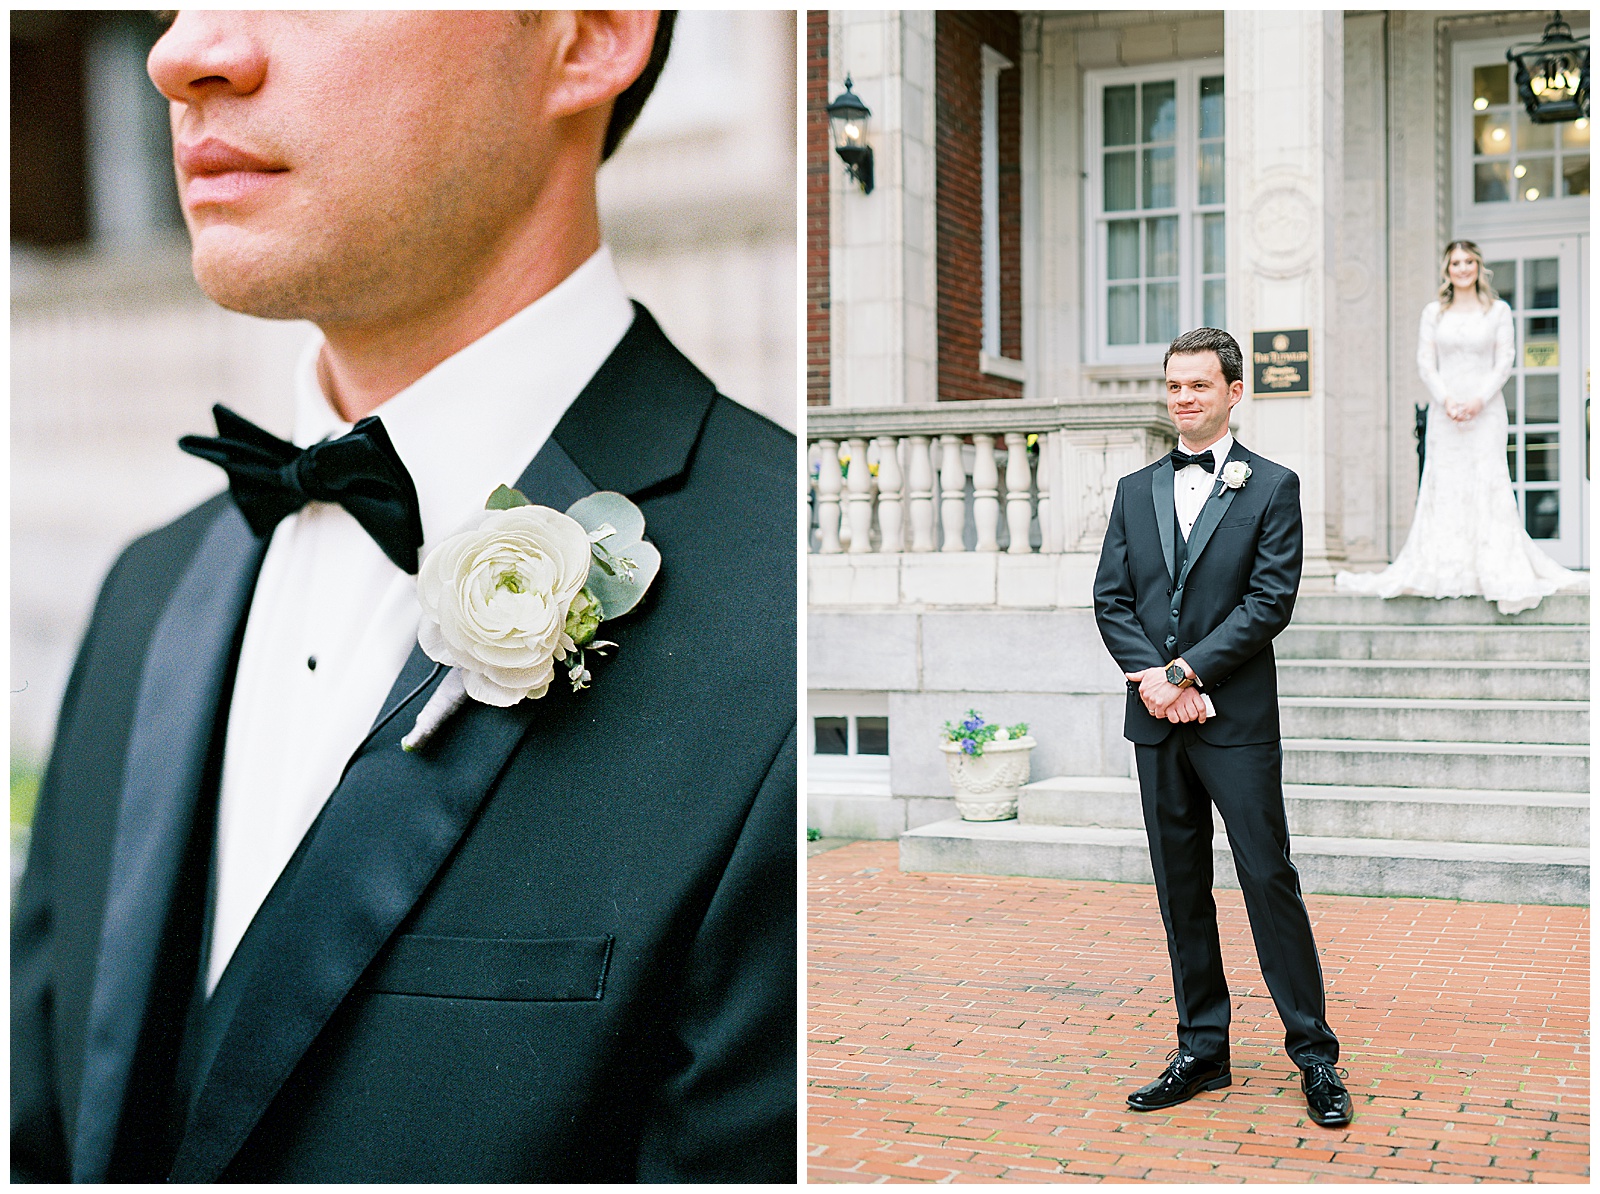 Groom at The Tutwiler